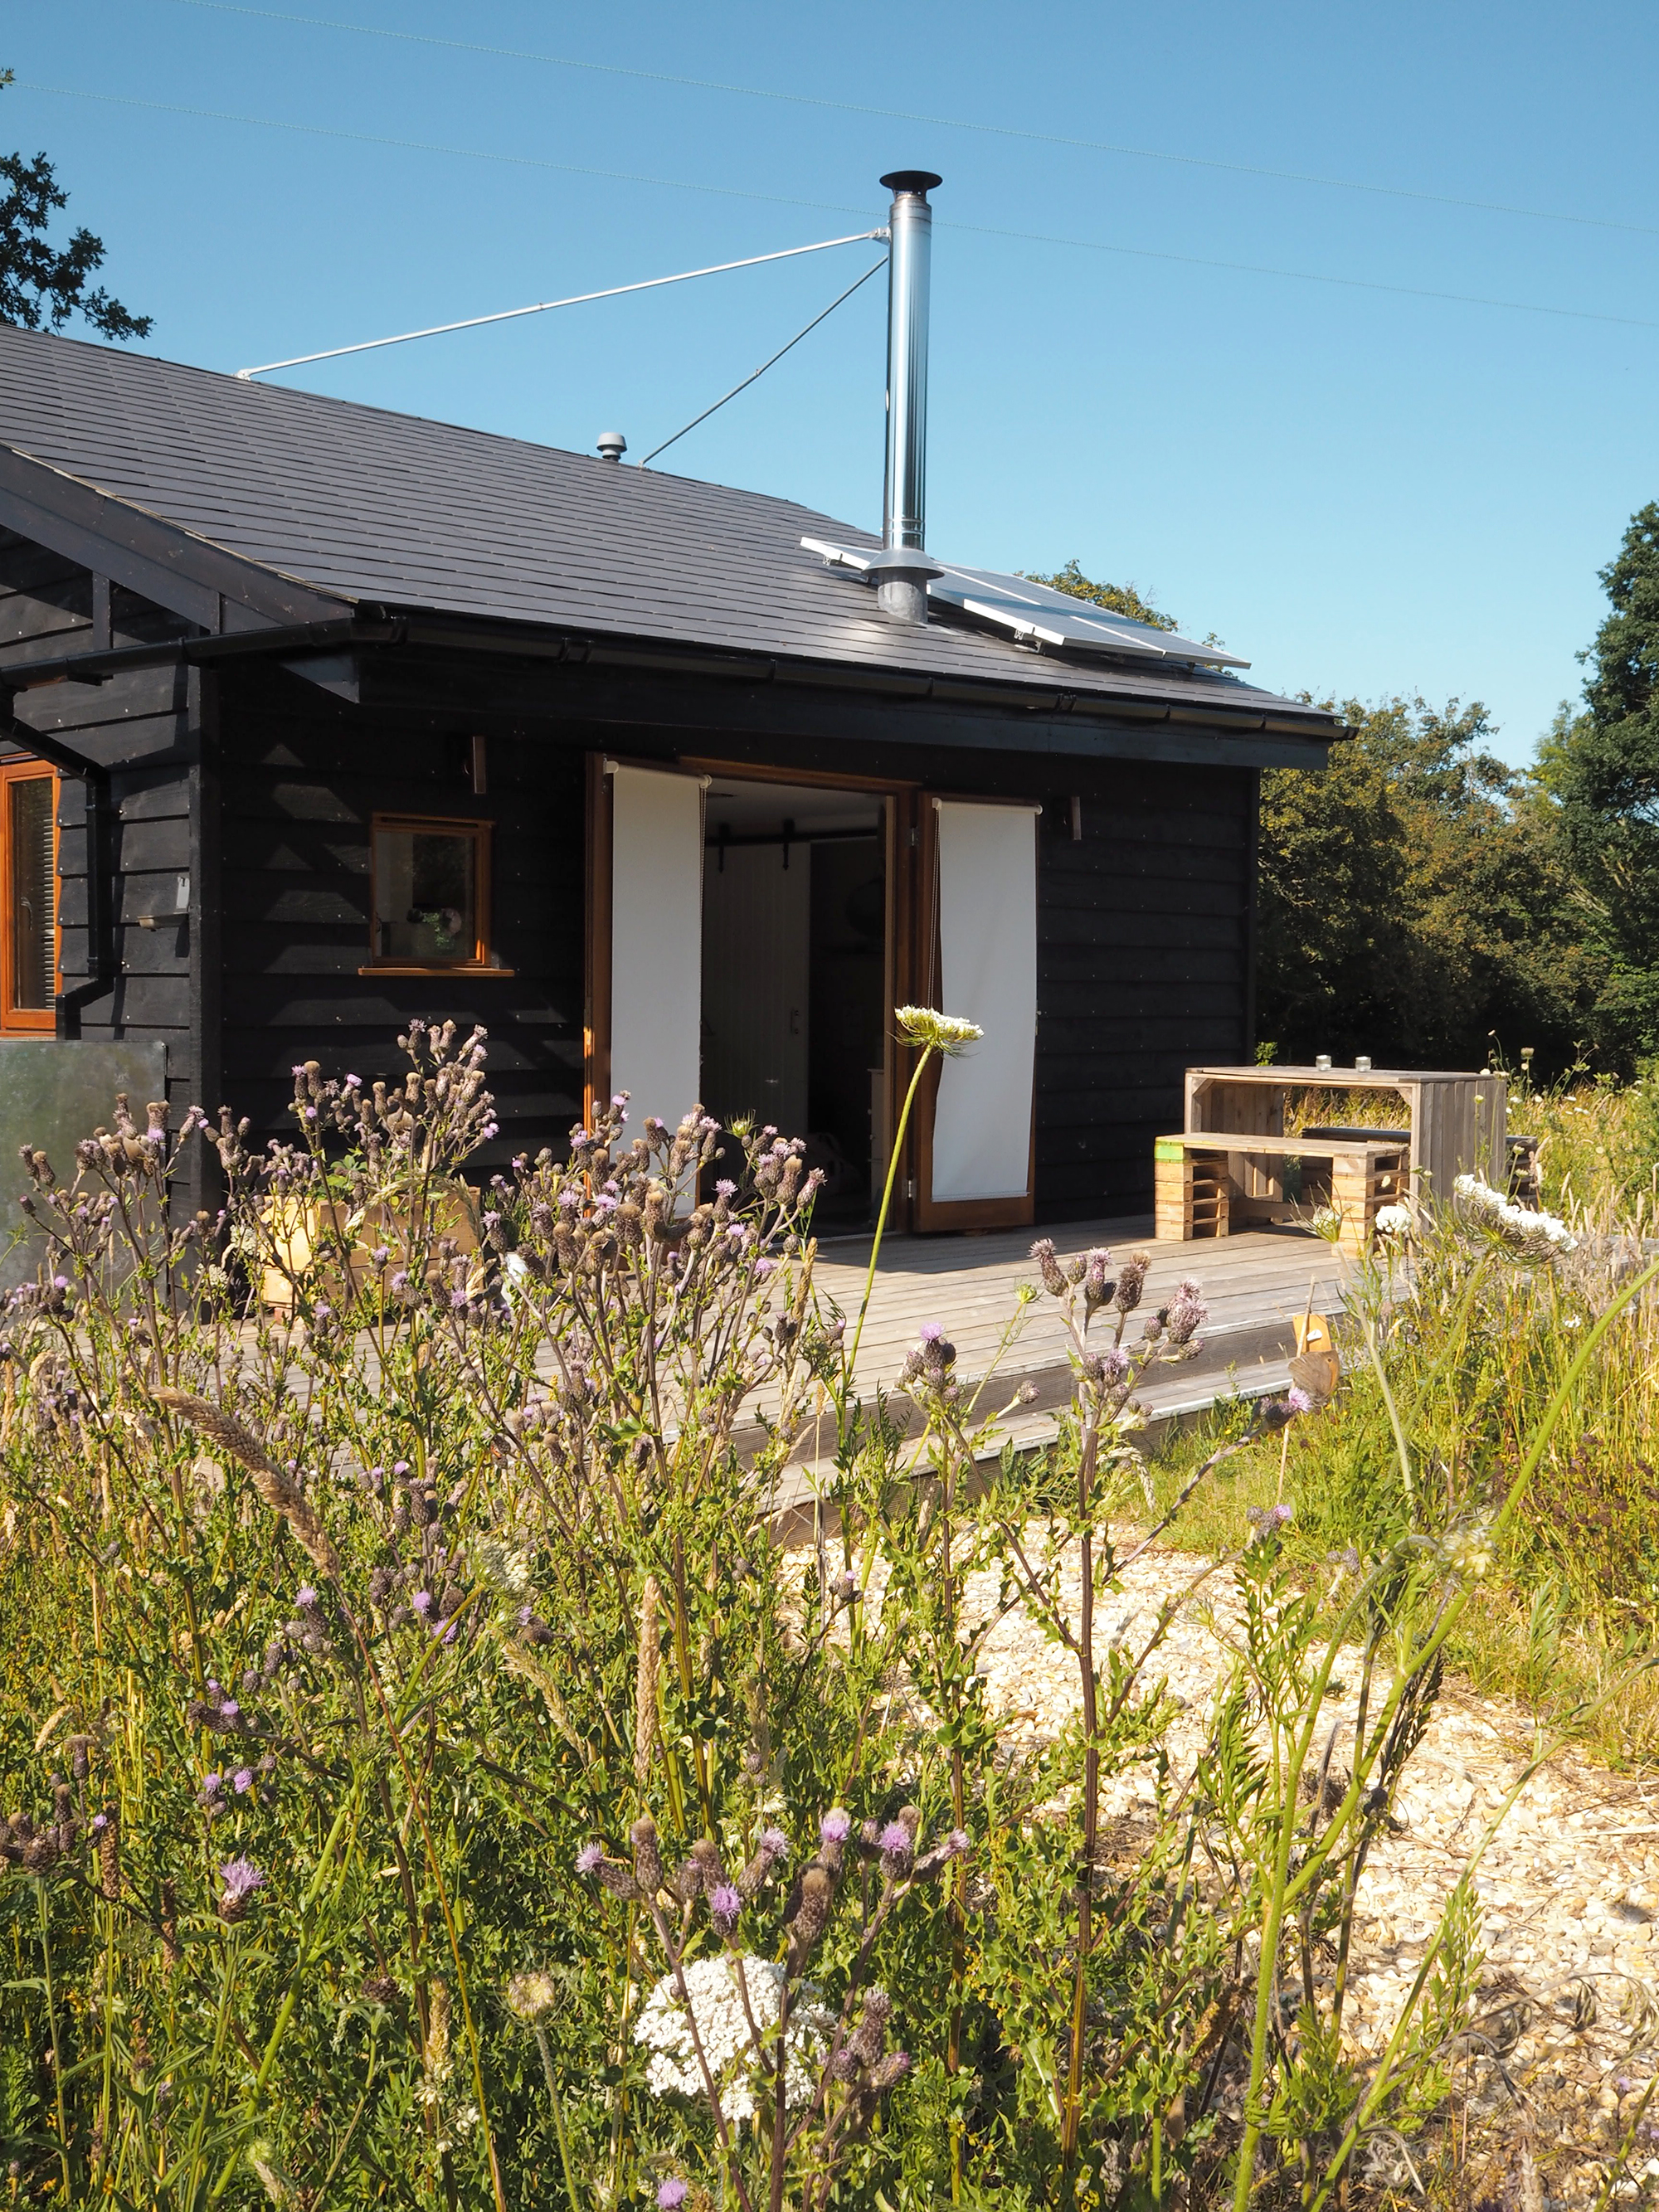 Sustainable holiday cabins - Tiny Home holidays - Isle of wight